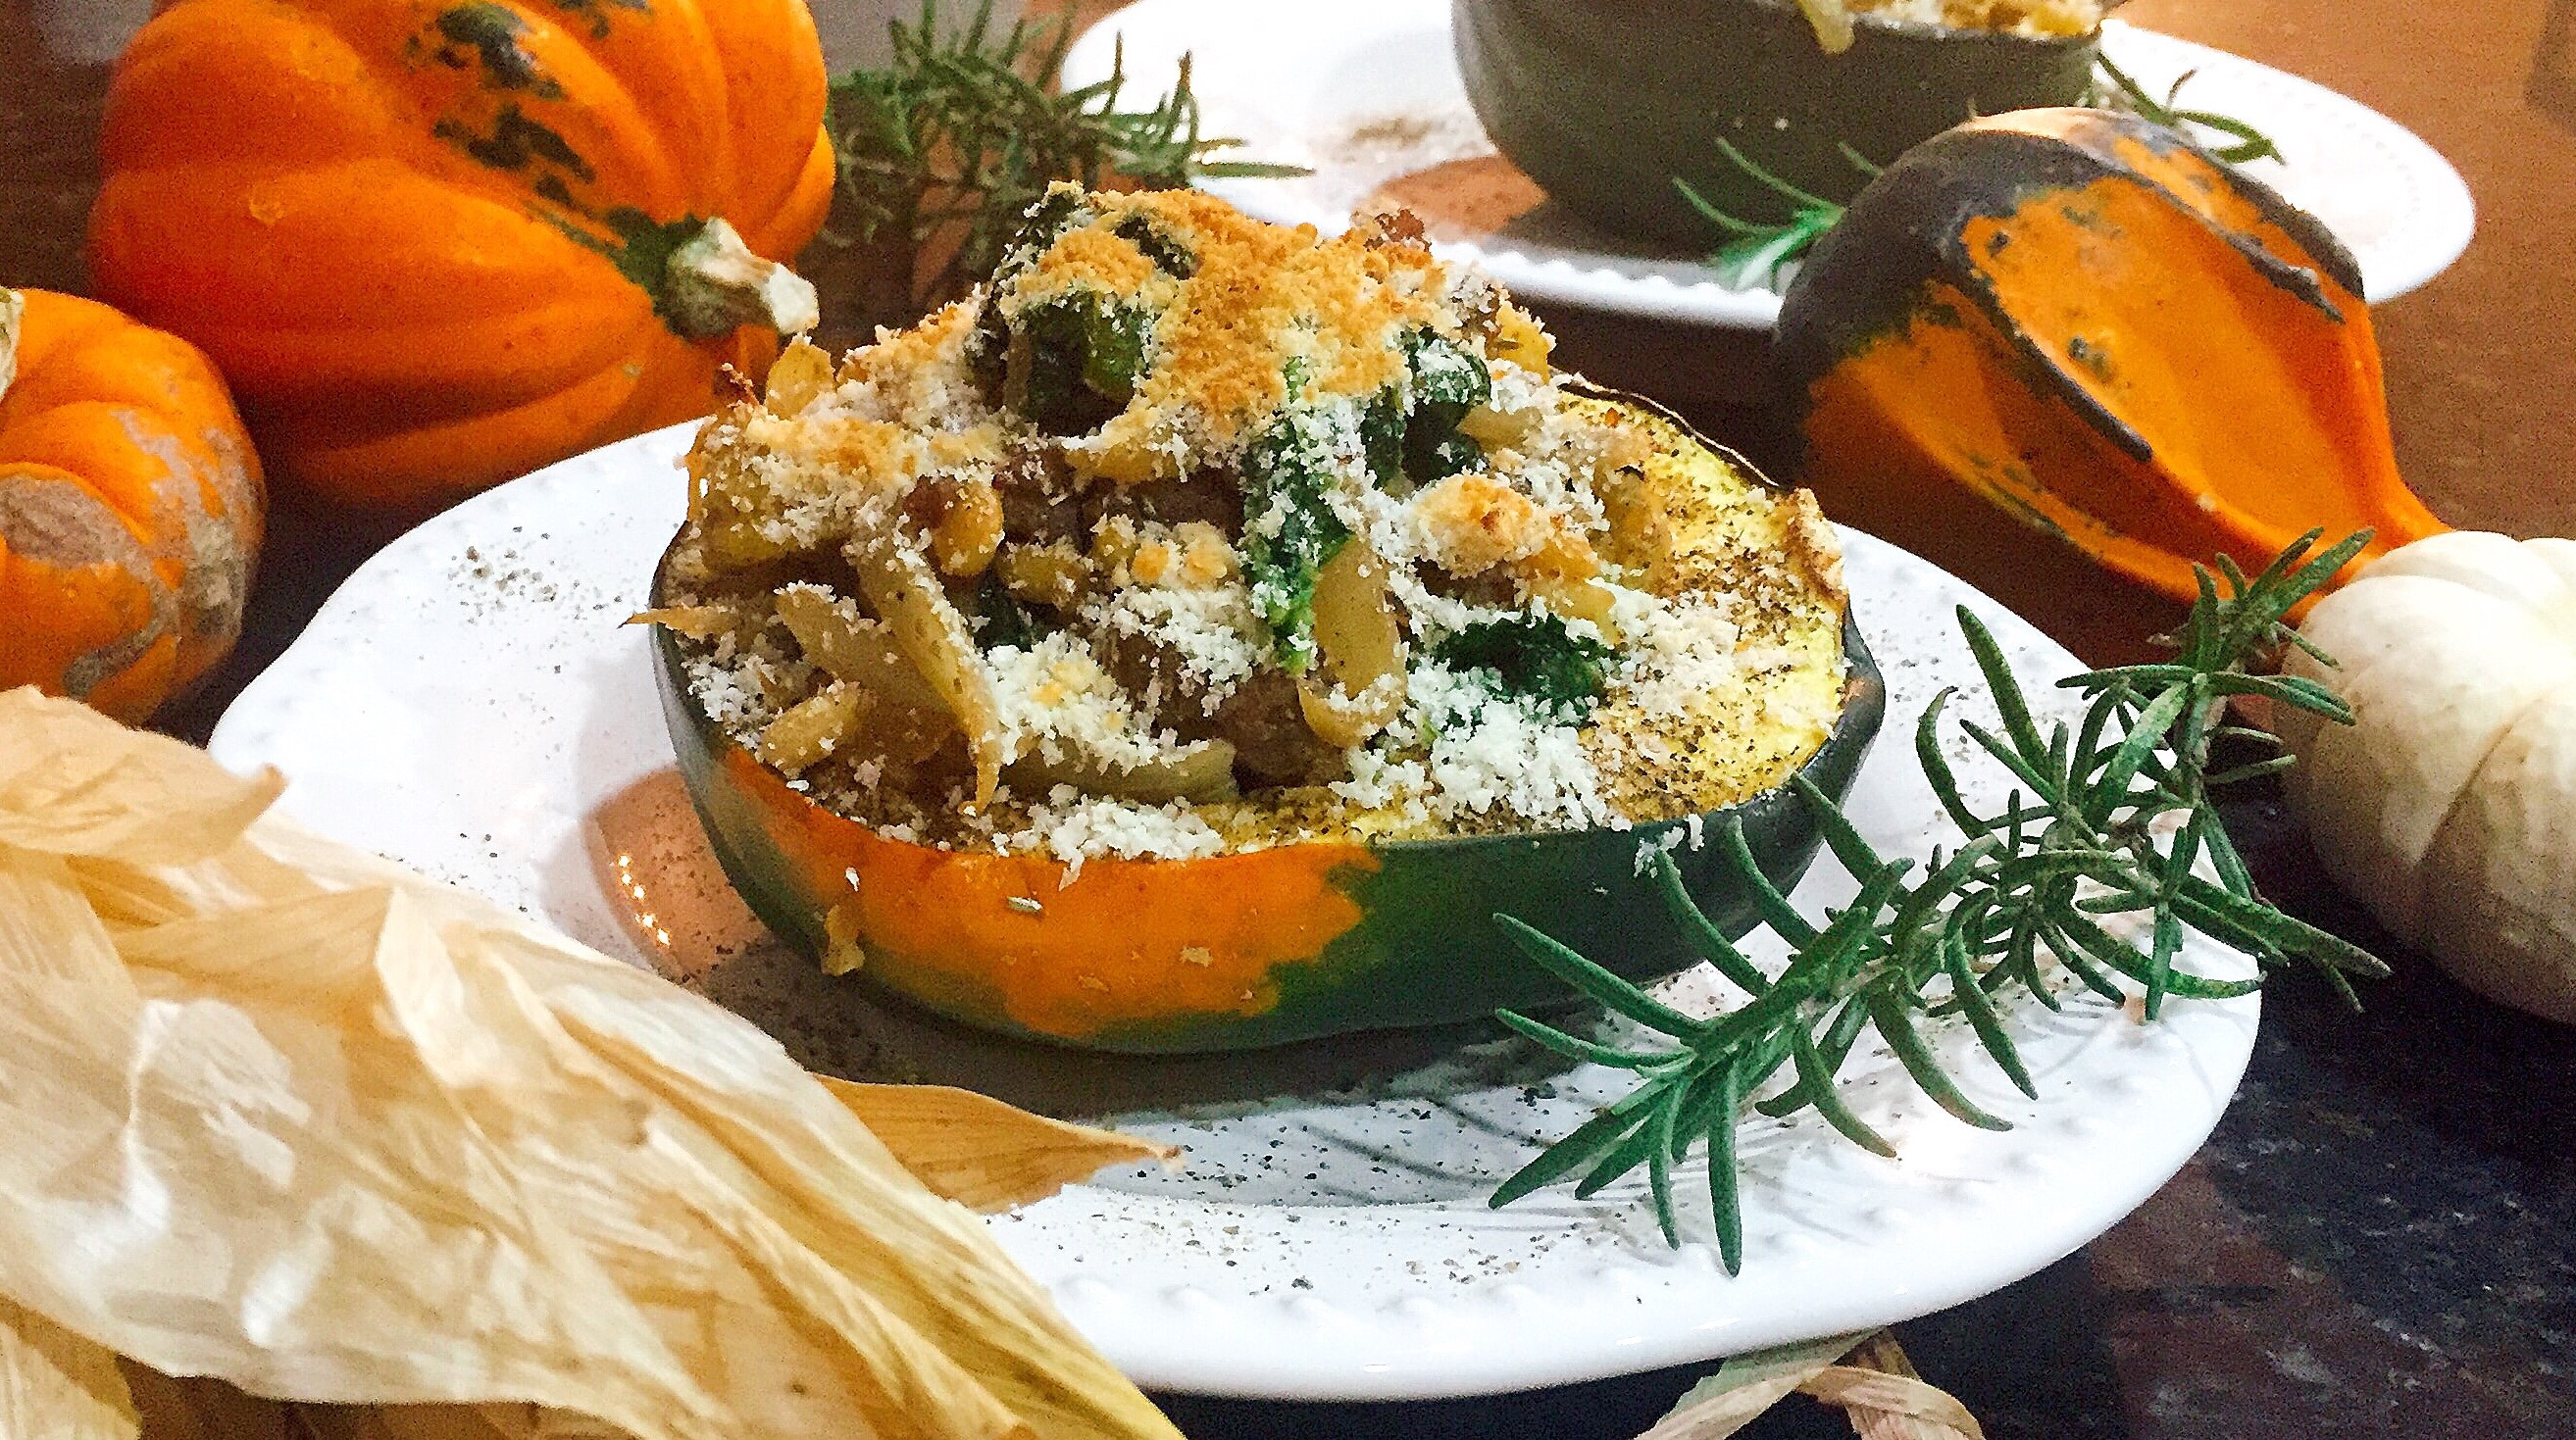 Sausage and Kale Stuffed Acorn Squash with a Parmesan Breadcrumb Topping